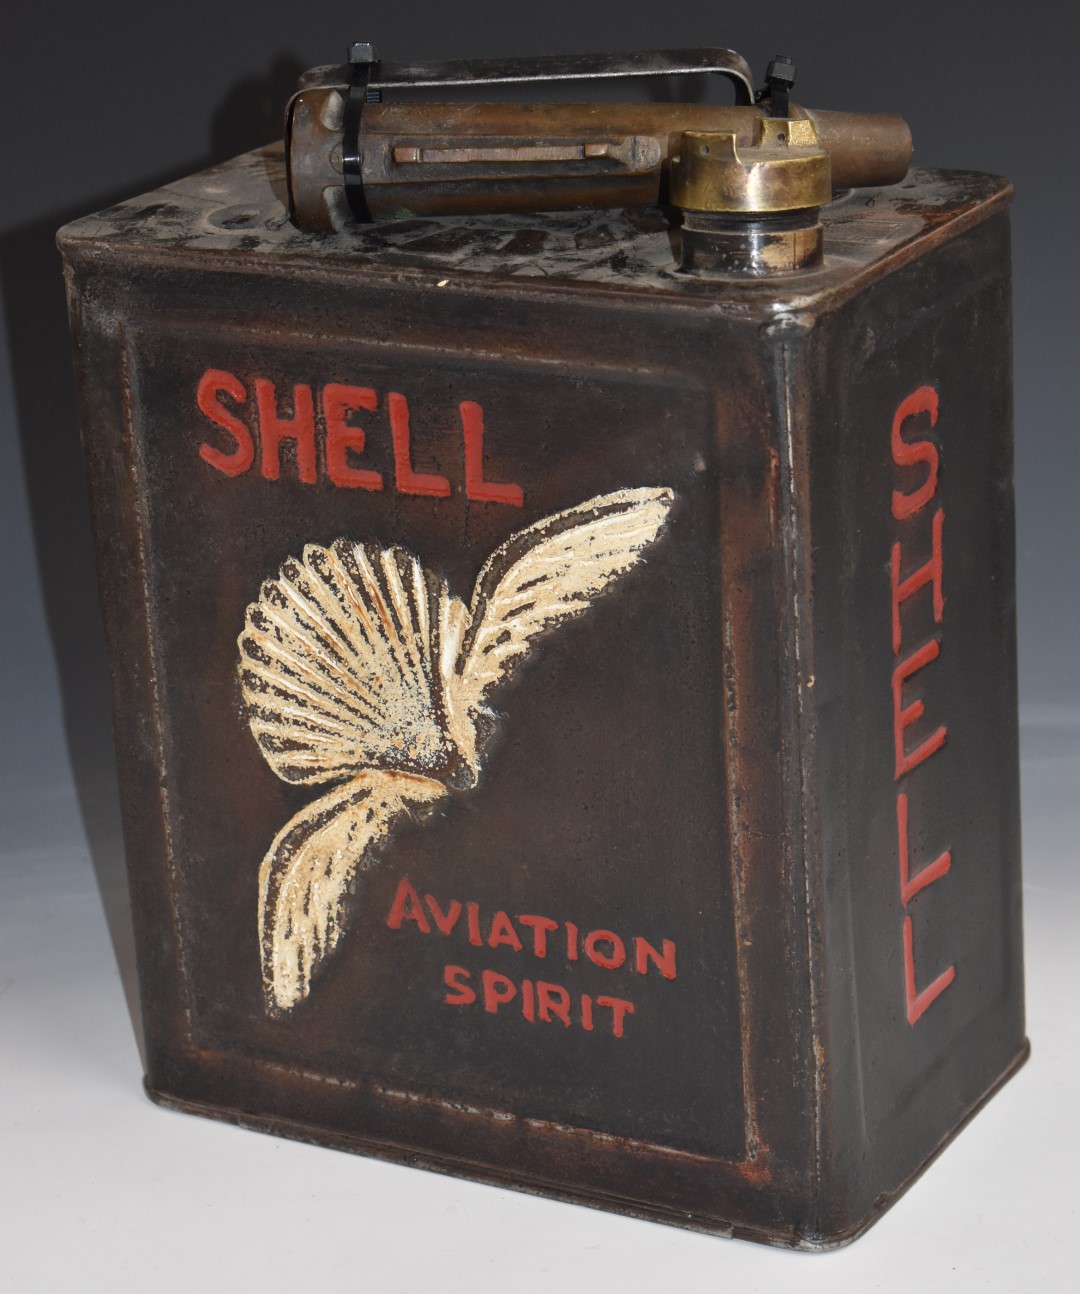 Two vintage 2 gallon vintage car petrol cans comprising Shell Aviation (1934) and Redline (1939), - Image 4 of 5